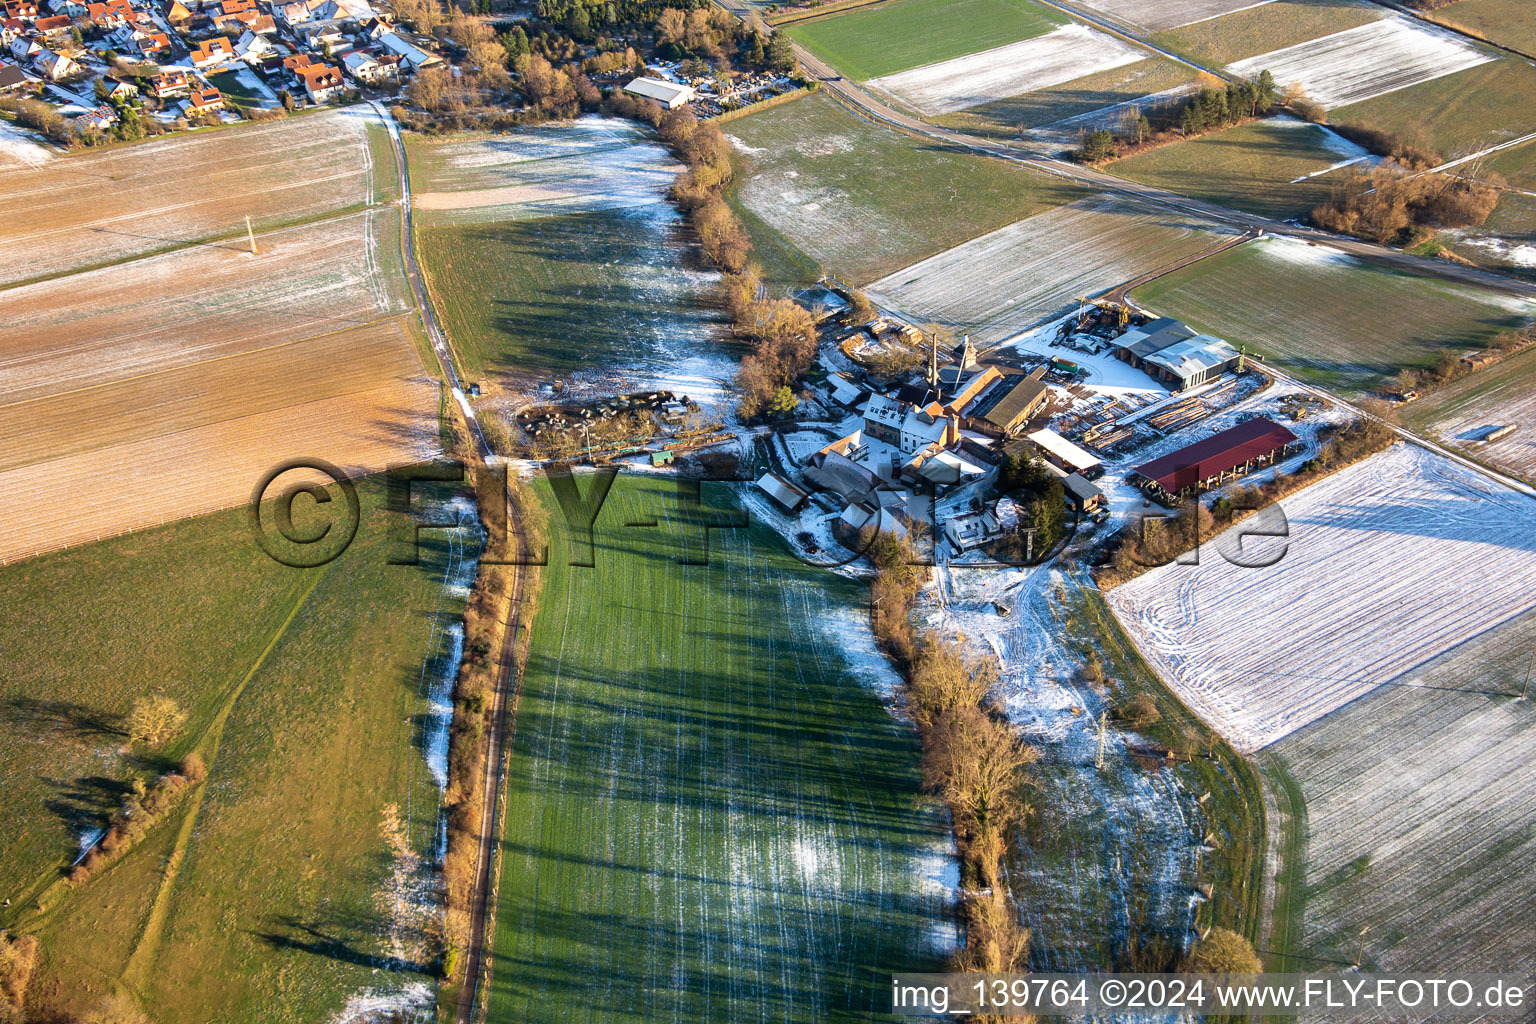 Aerial photograpy of ORTH woodworks in the Schaidter Mühle in winter with snow in the district Schaidt in Wörth am Rhein in the state Rhineland-Palatinate, Germany